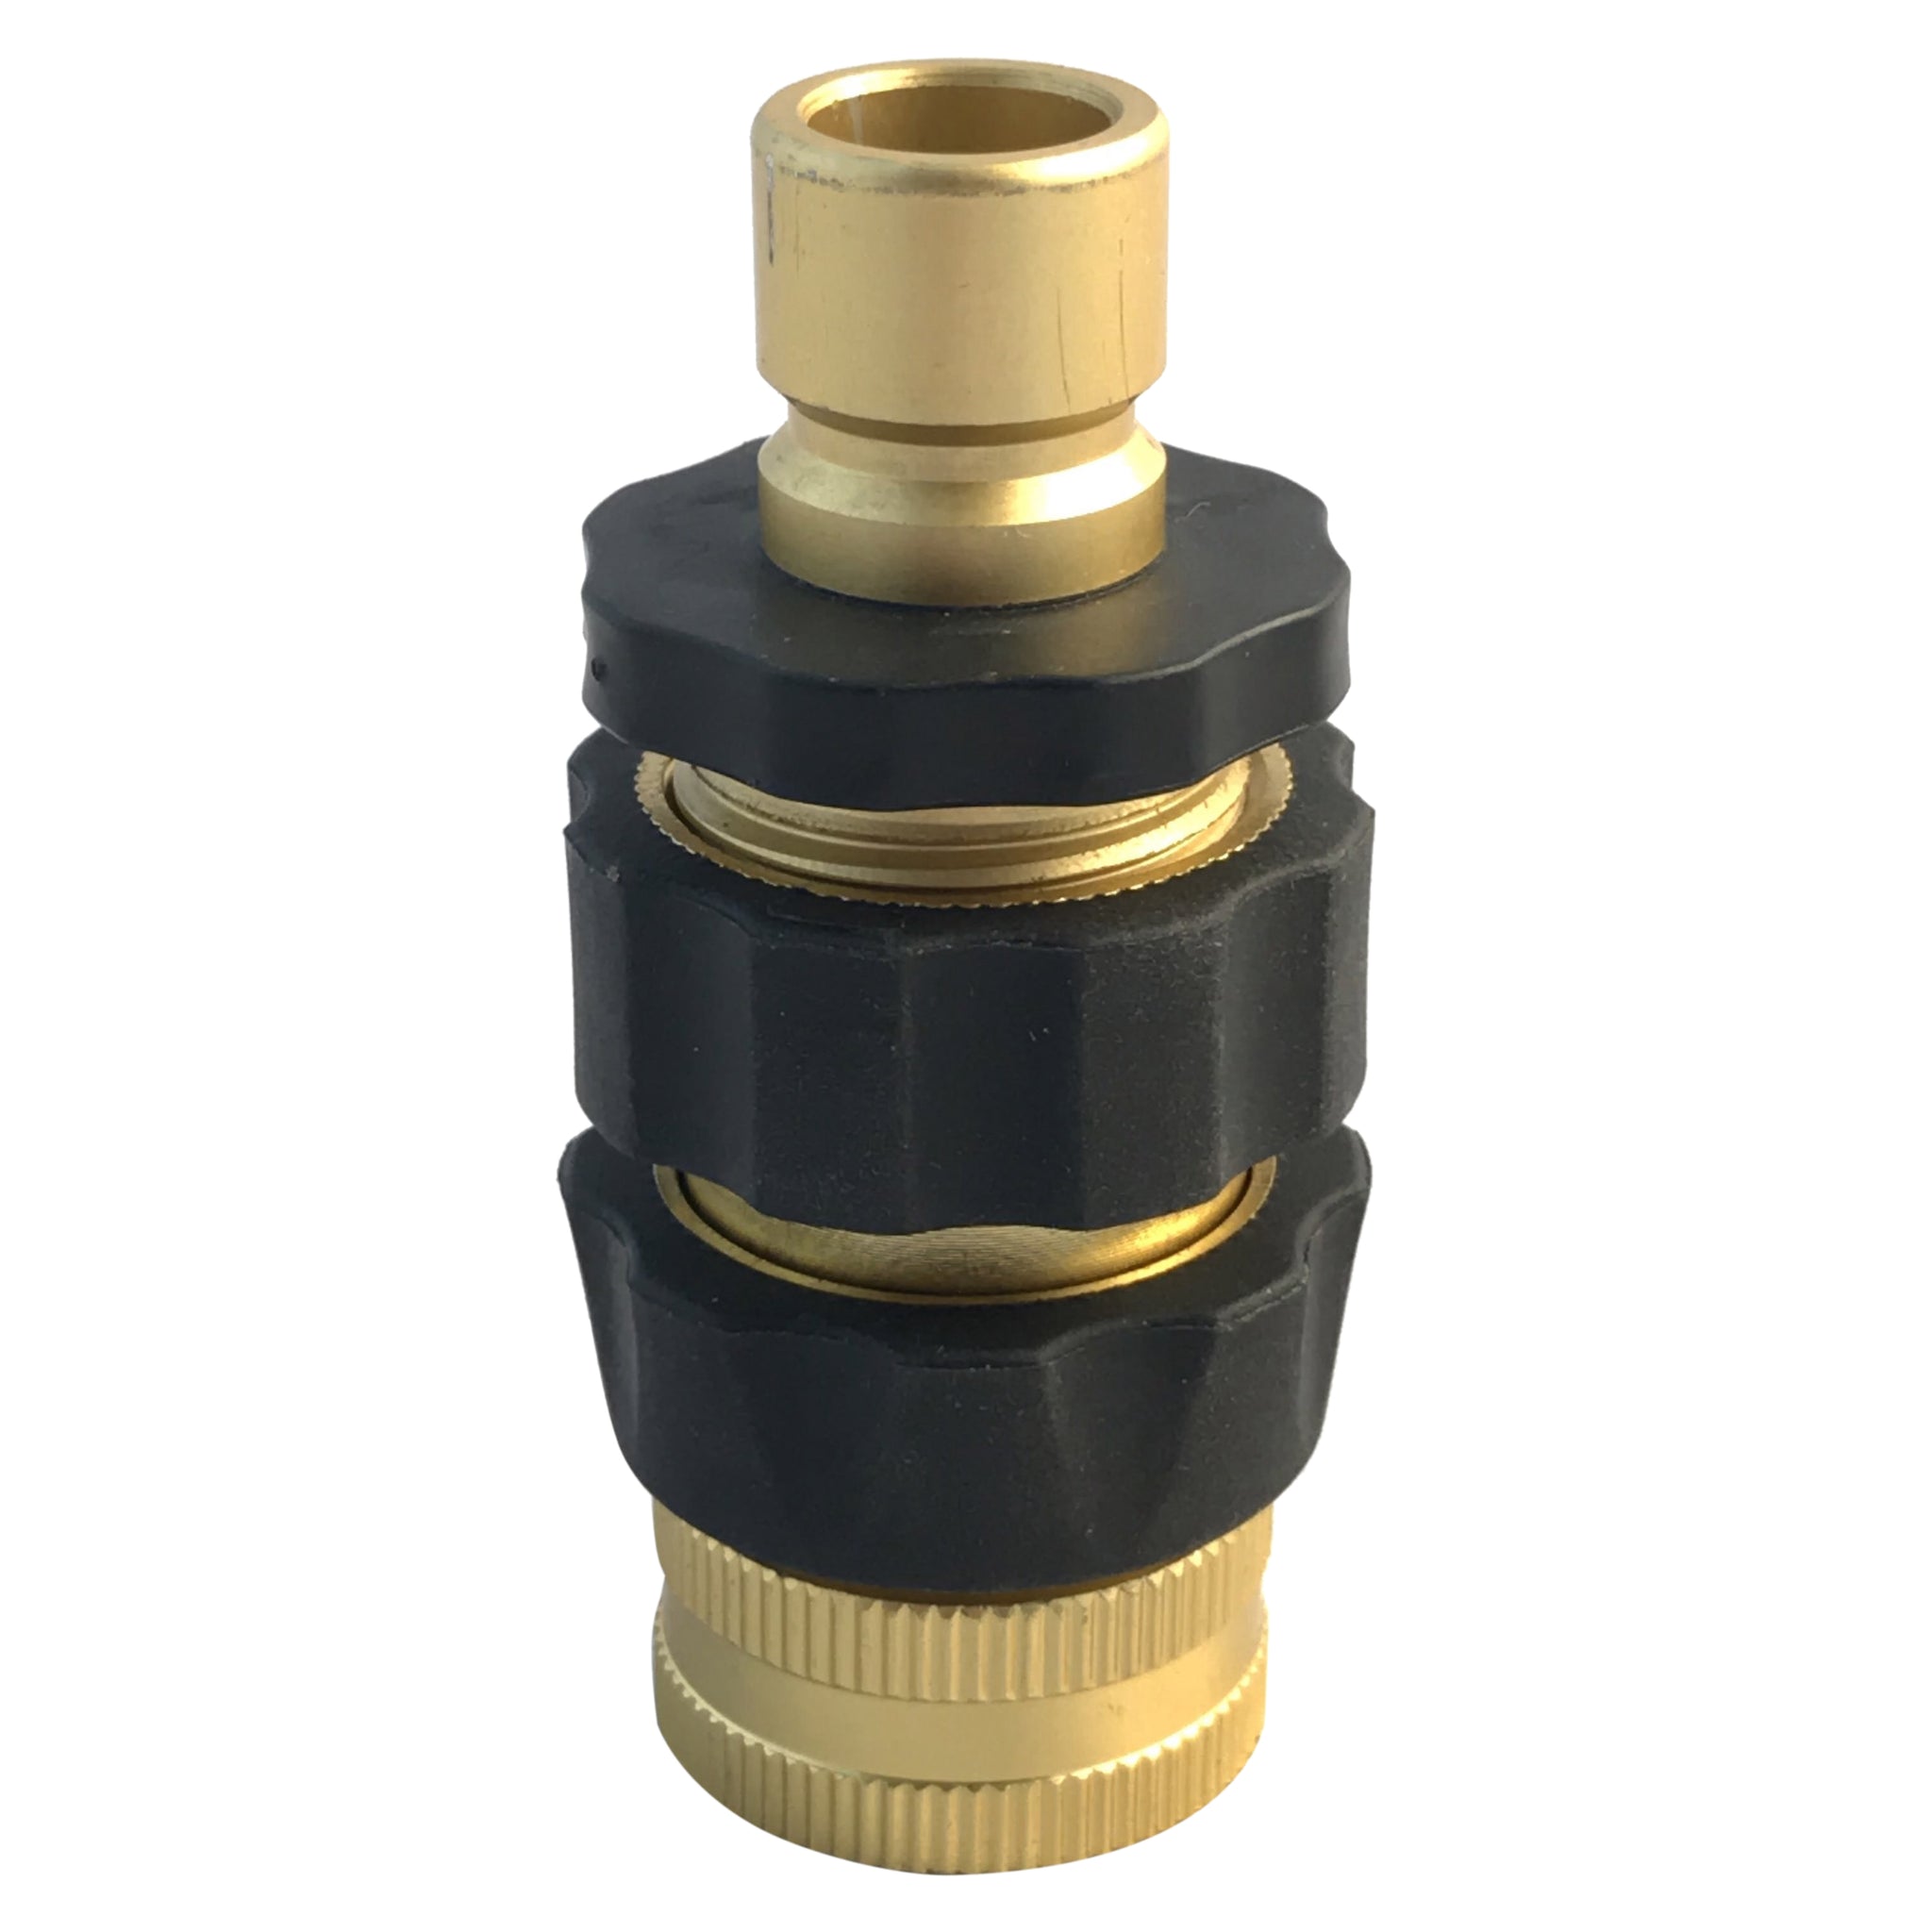 water hose connector female to female